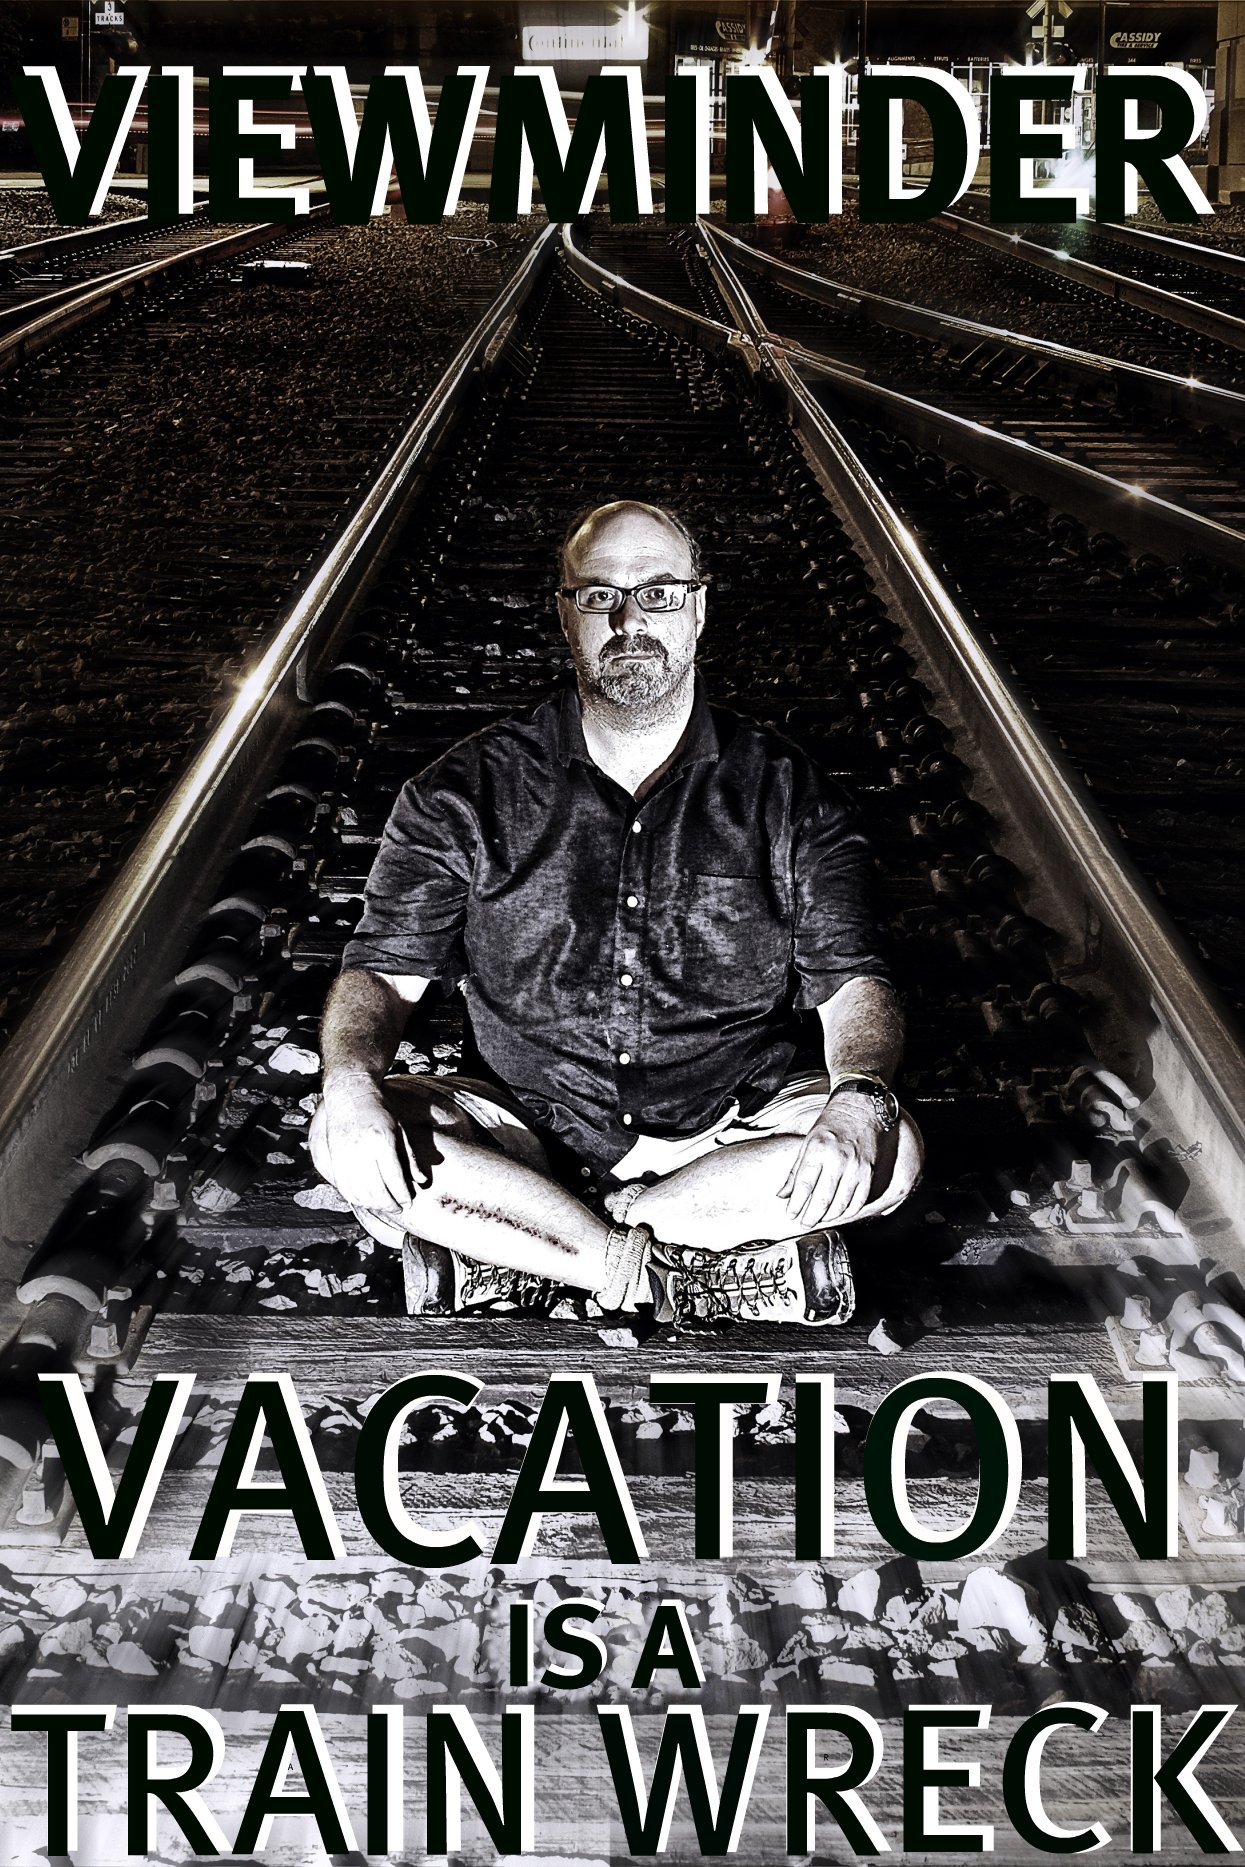 Another Excerpt: Vacation is a Trainwreck